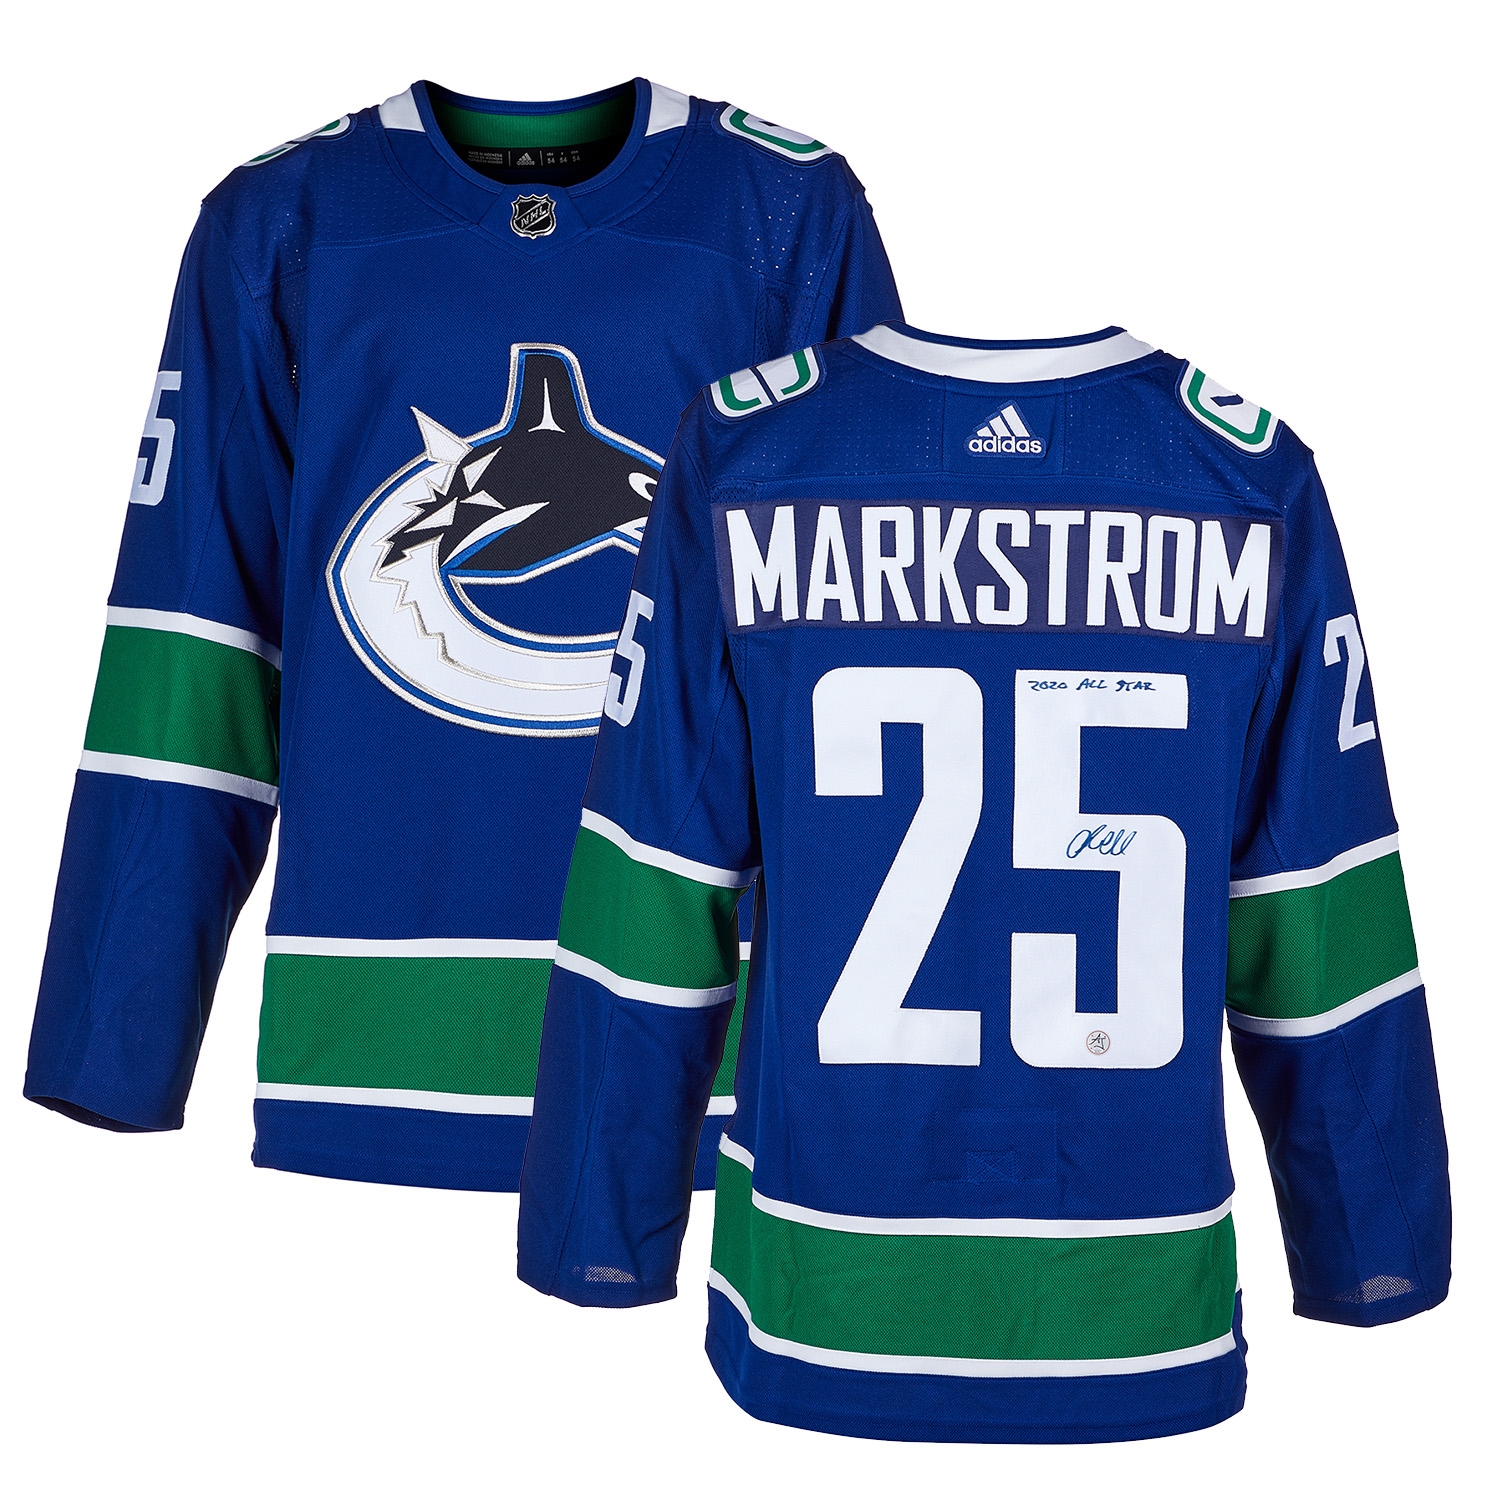 Jacob Markstrom Signed Vancouver Canucks 2020 All-Star adidas Jersey